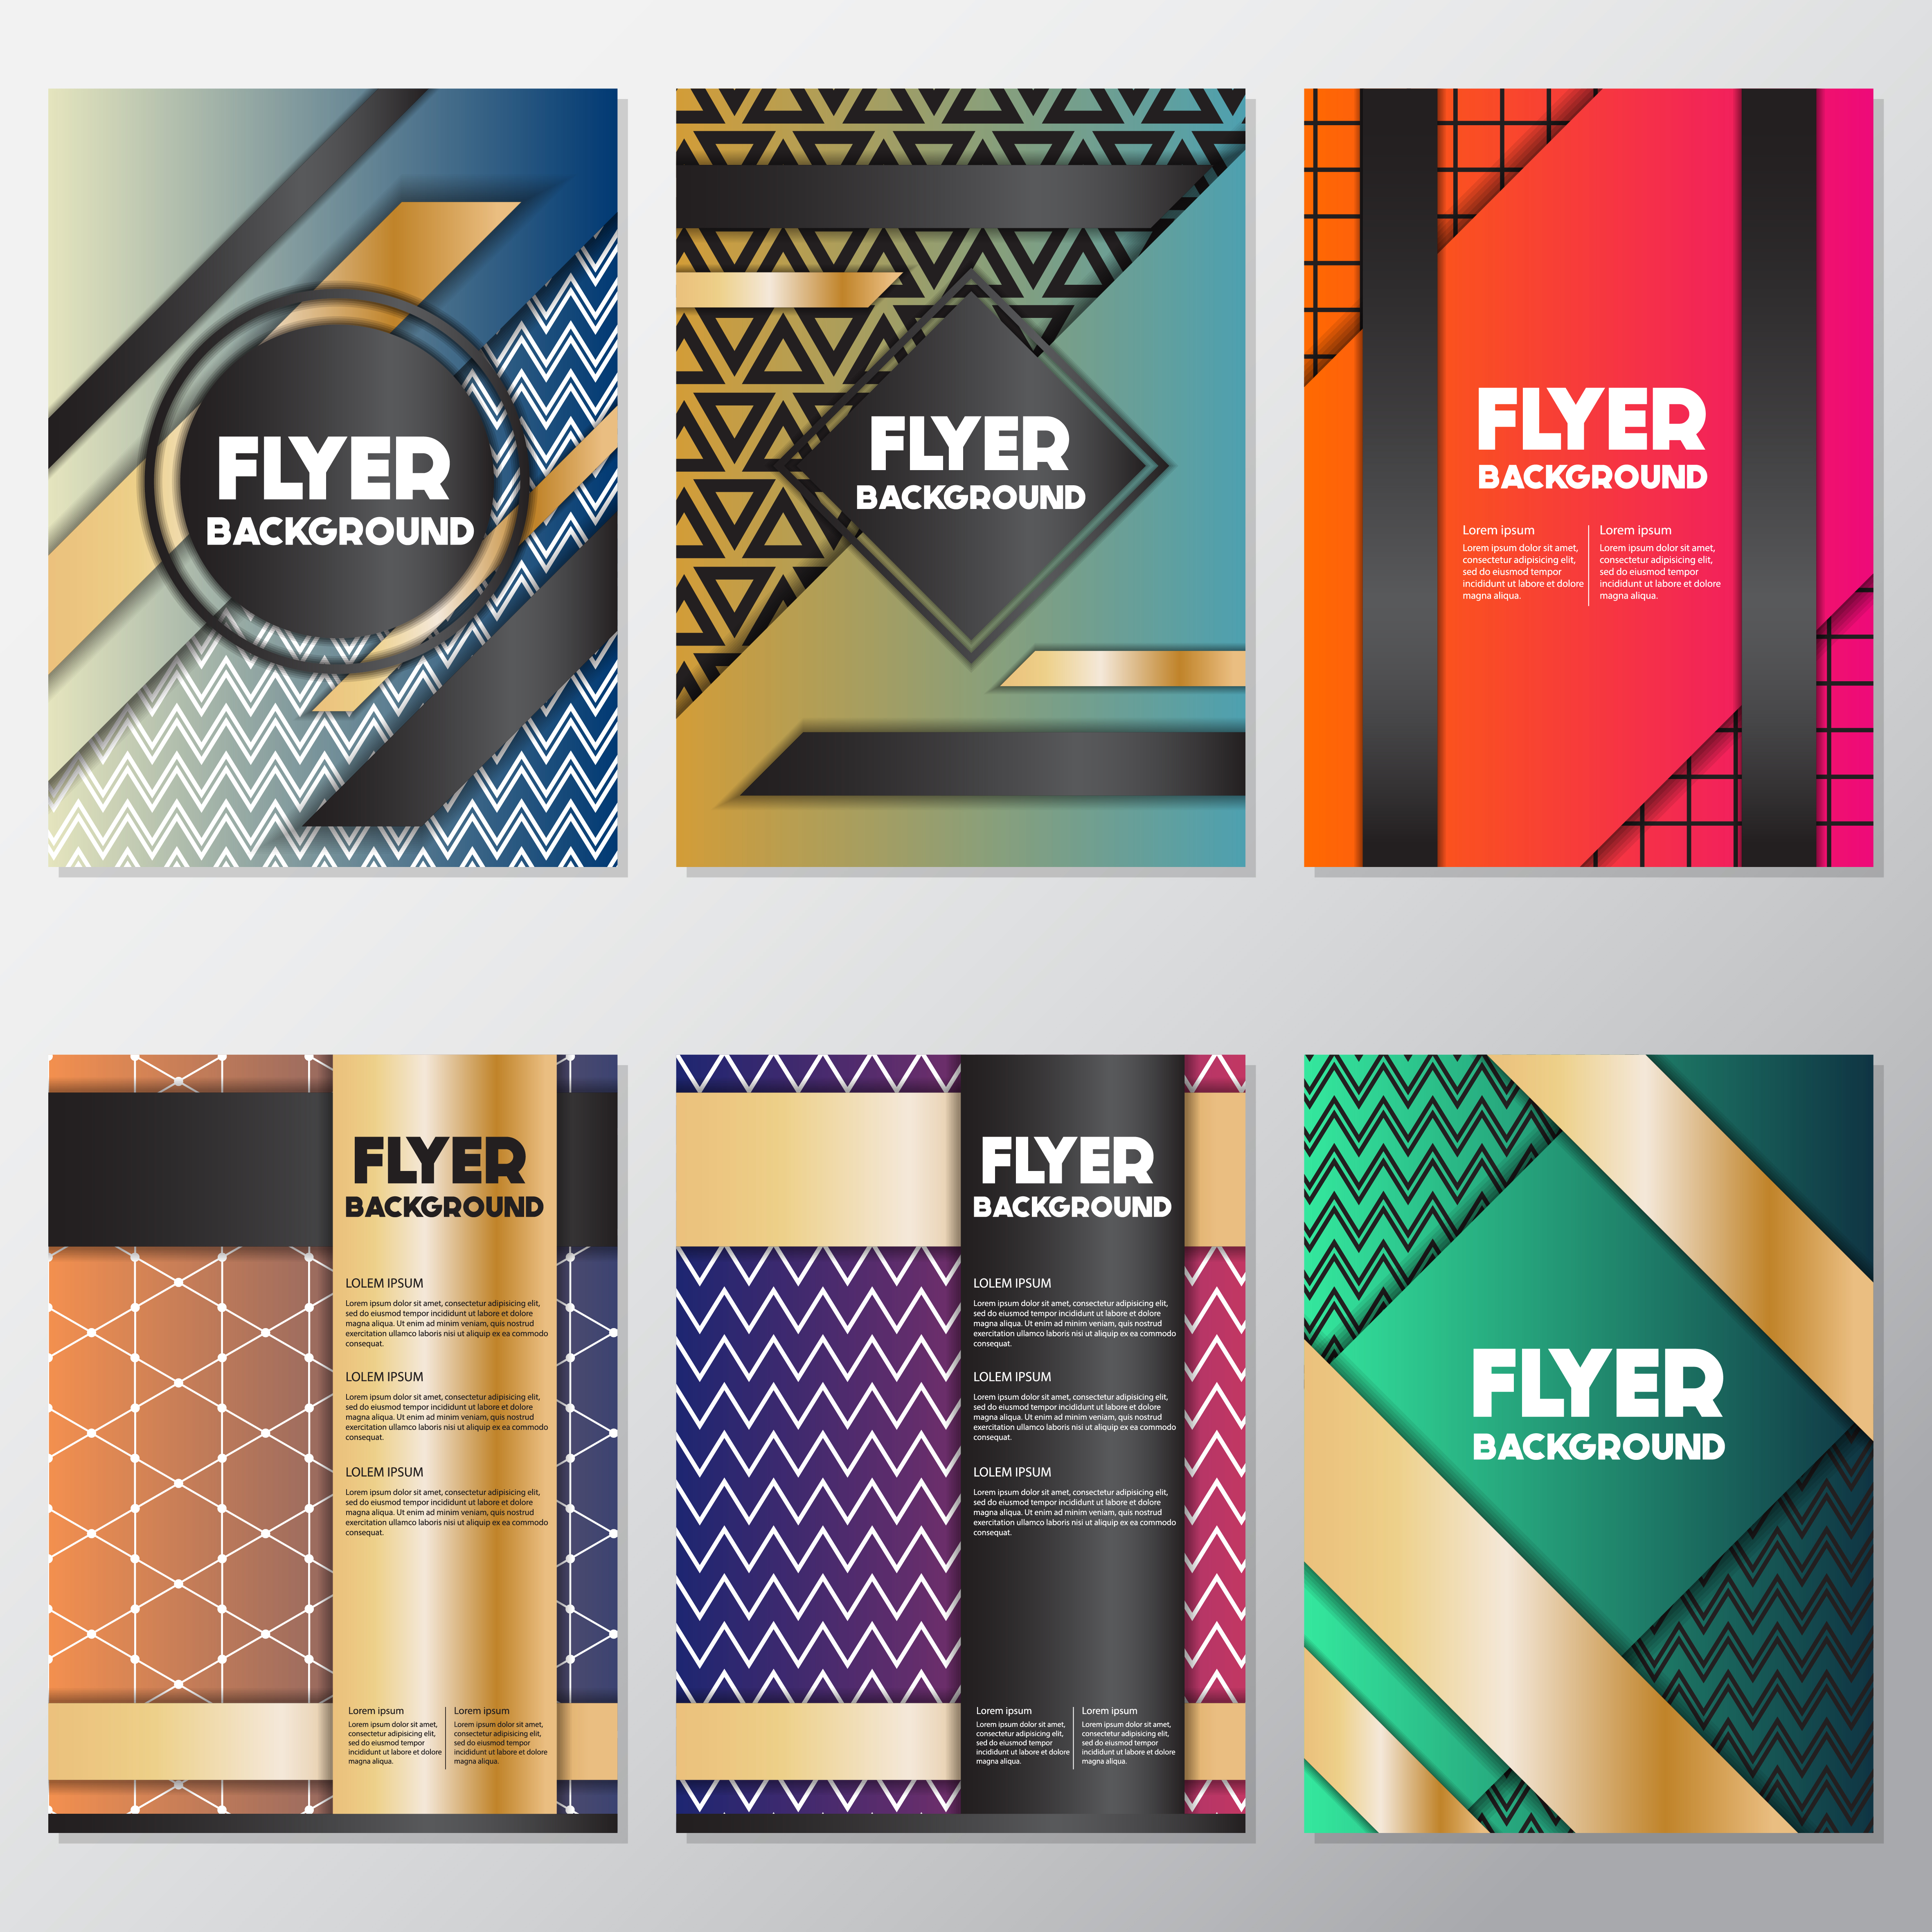 fresh background  flyer  style background  Design Template  